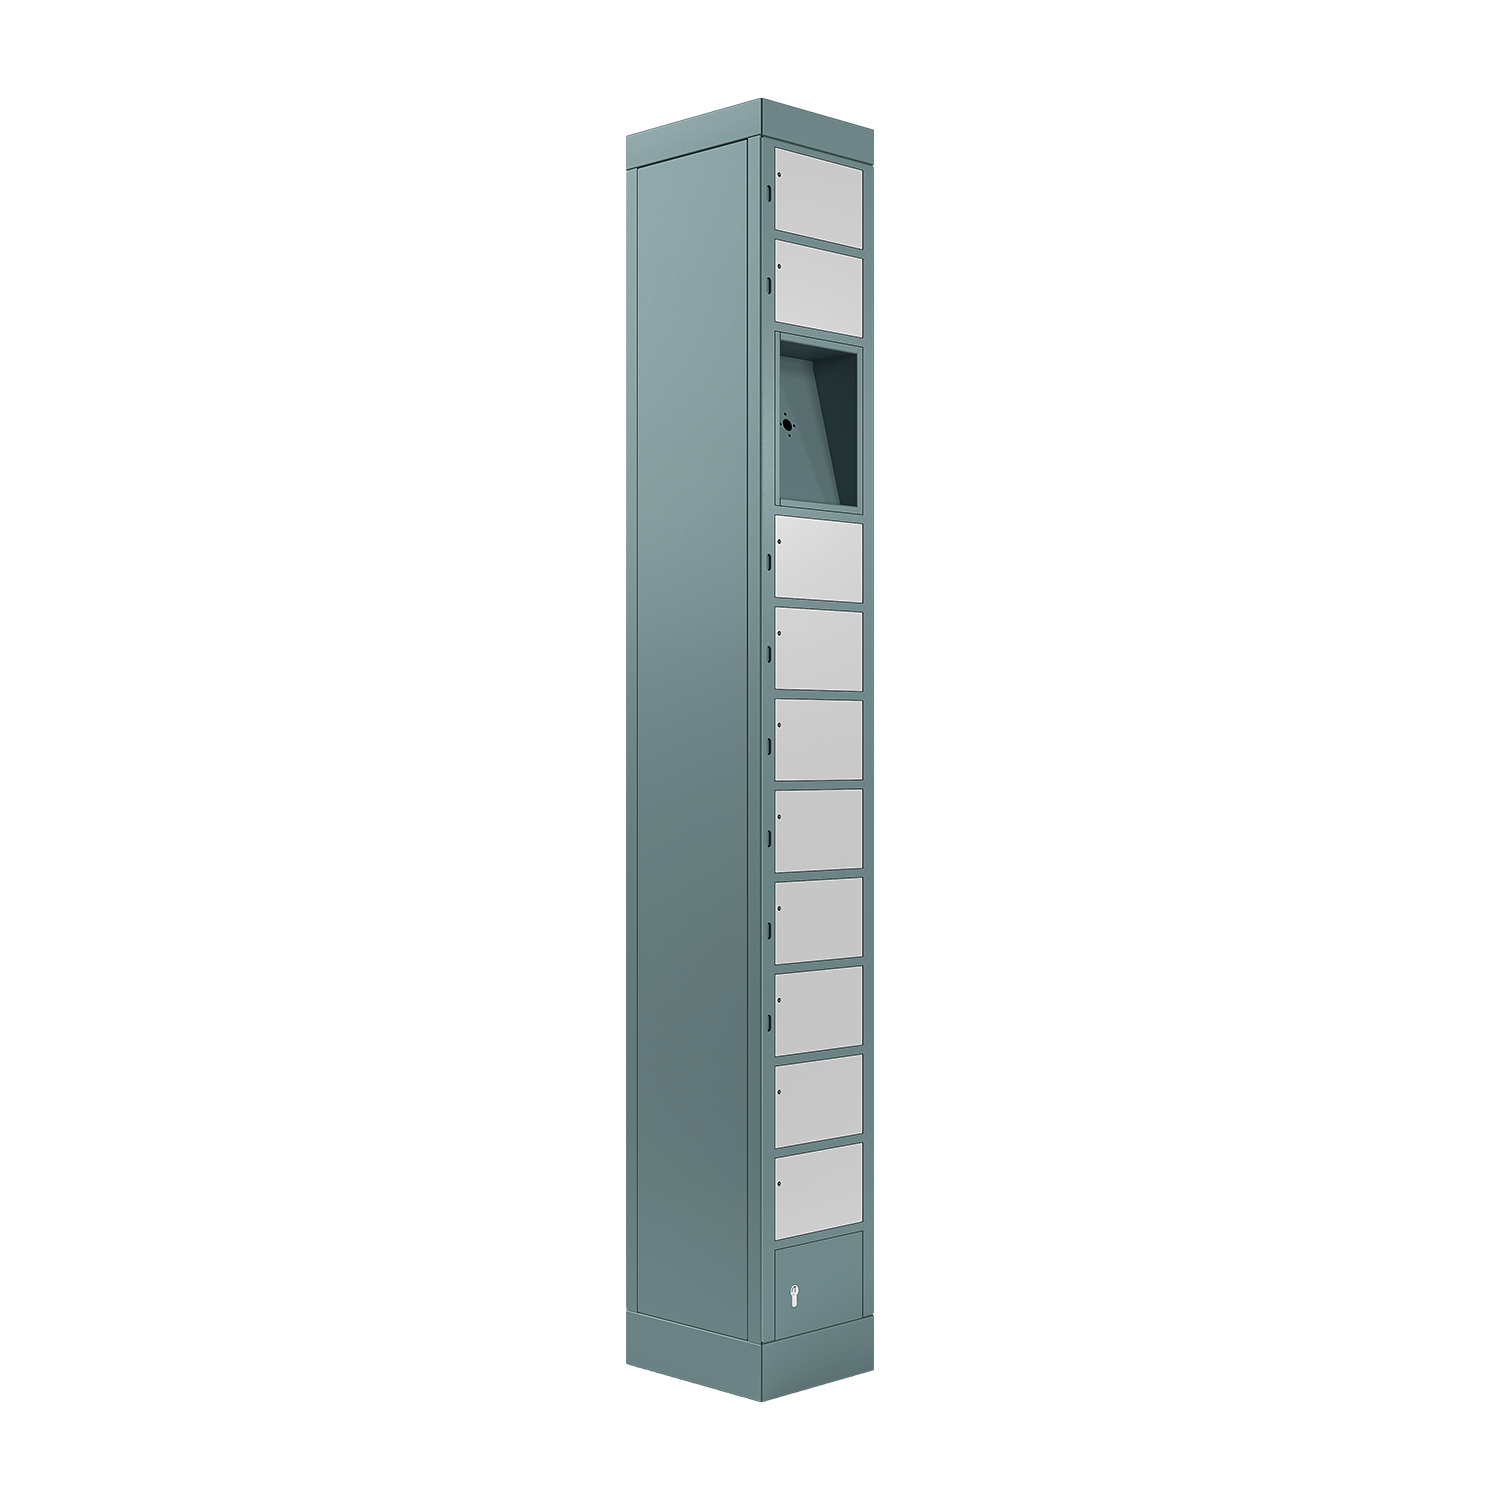 locker compartment system, size S, with 10 compartments, space for user terminal, left view